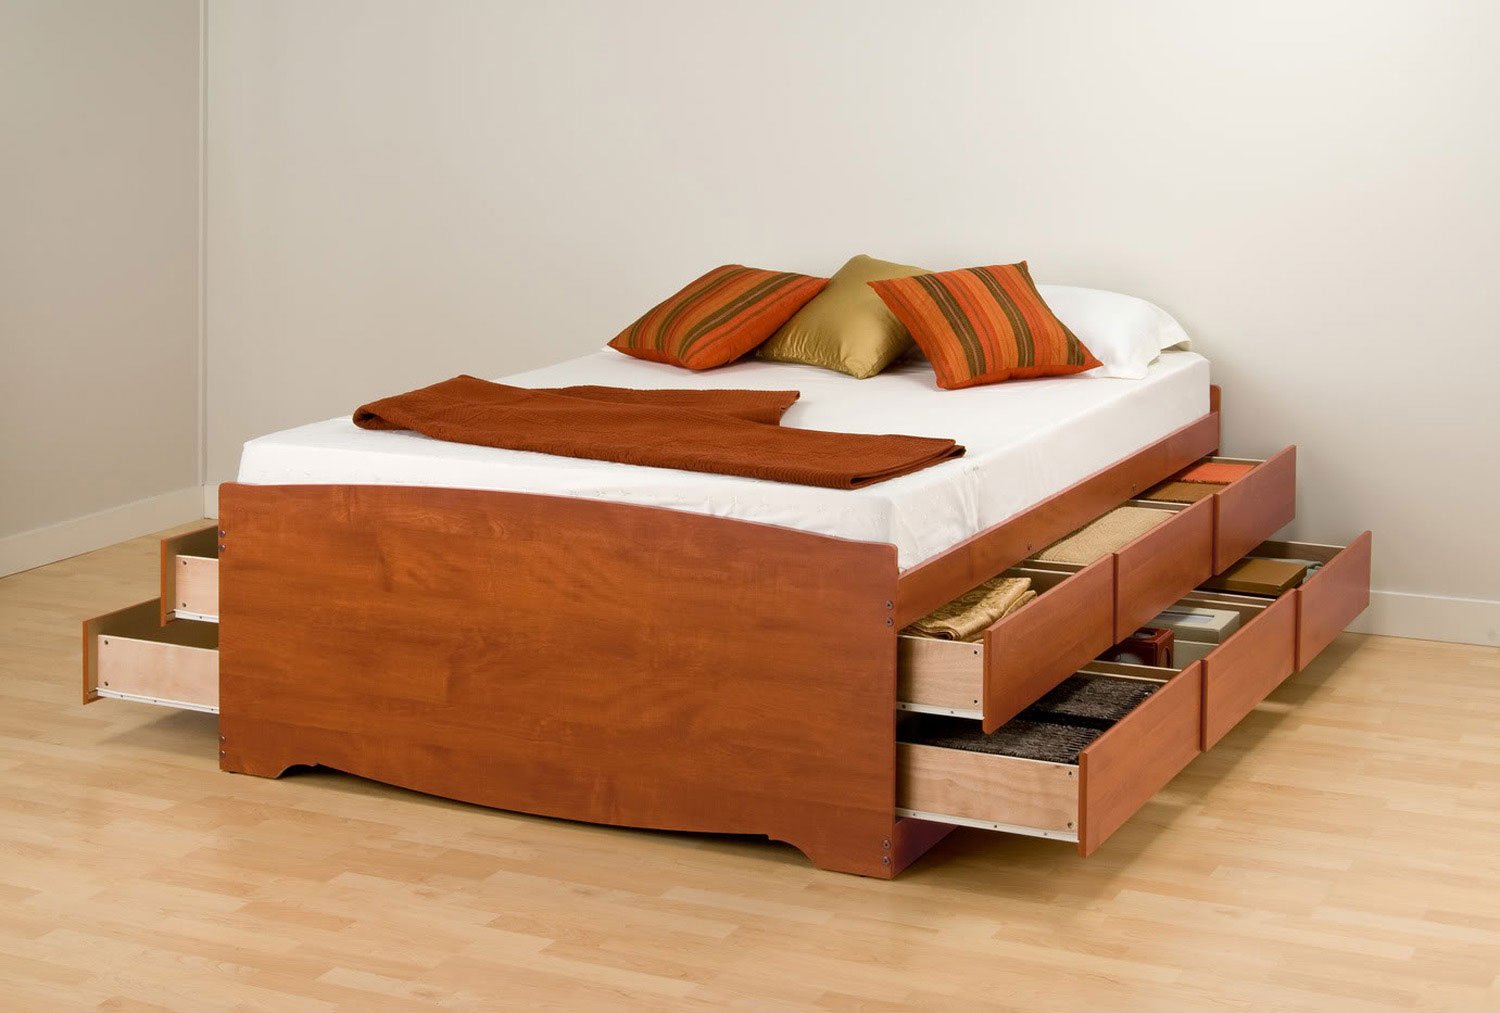 Prepac Captains Platform Storage Bed with 12 Drawers - Cherry